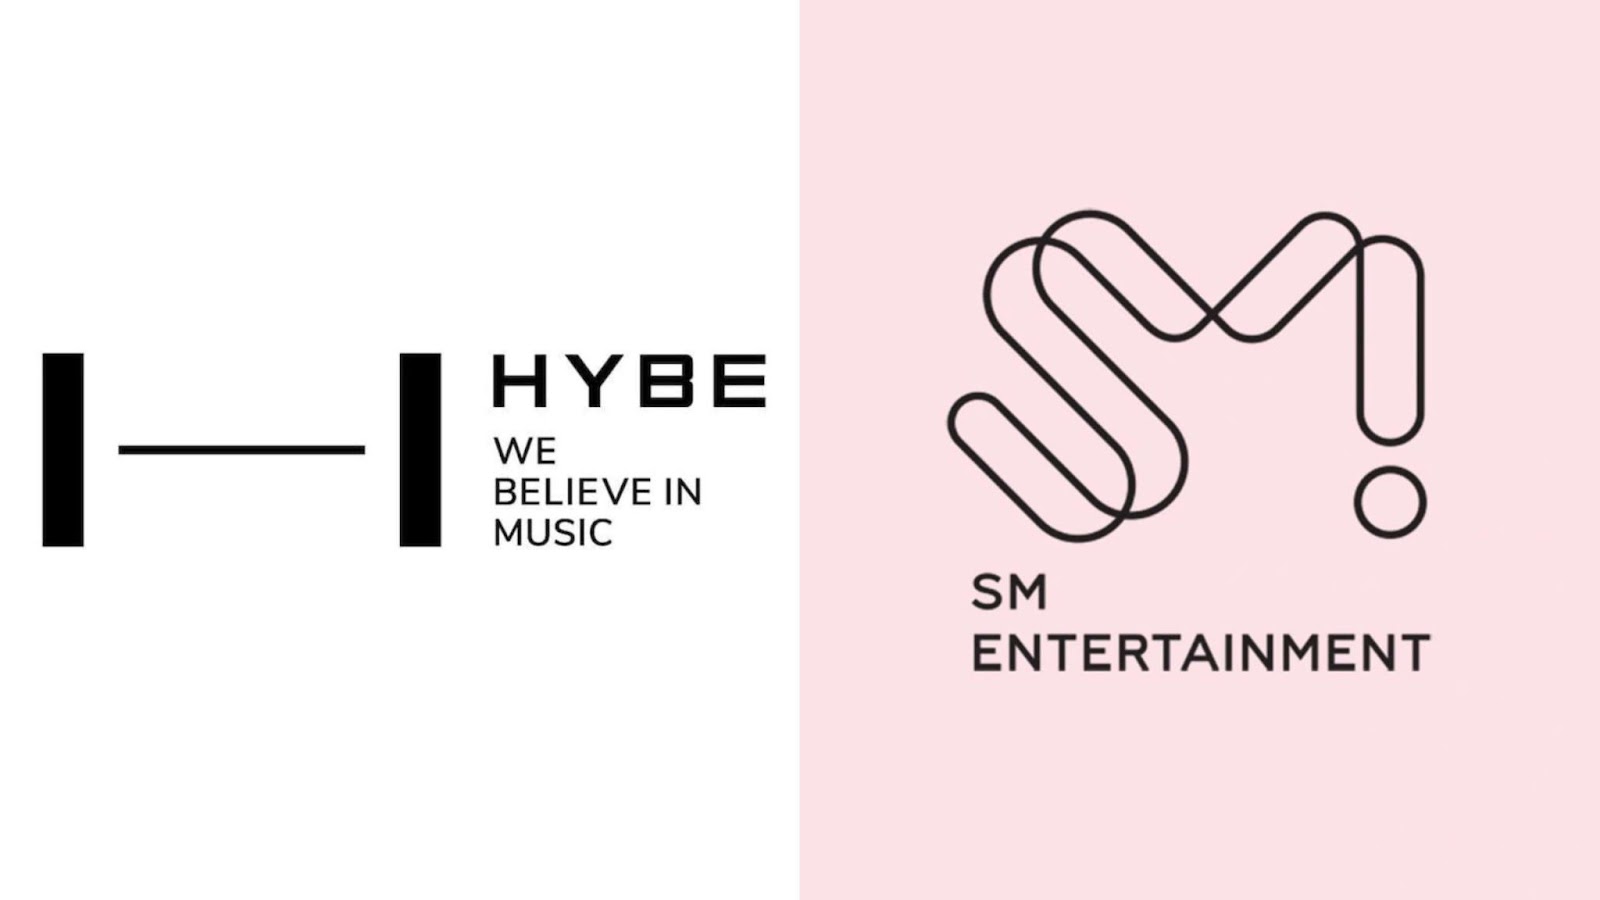 (K-pop) BTS’s agency, HYBE Labels Buys Shares From SM Entertainment; HYBE Monopoly on Industry? - Asiana Times